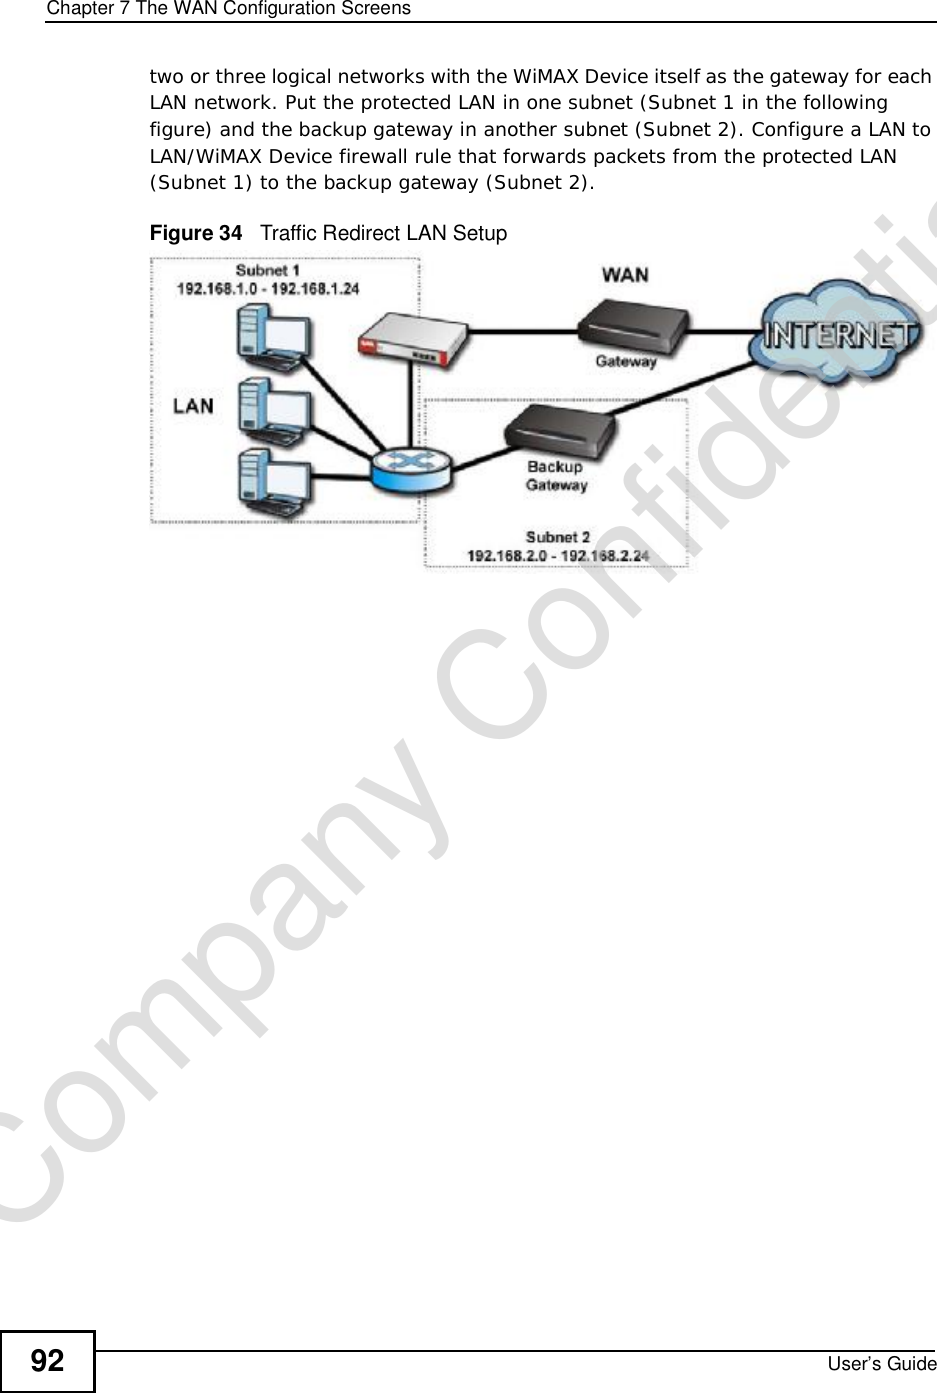 Chapter 7The WAN Configuration ScreensUser’s Guide92two or three logical networks with the WiMAX Device itself as the gateway for each LAN network. Put the protected LAN in one subnet (Subnet 1 in the following figure) and the backup gateway in another subnet (Subnet 2). Configure a LAN to LAN/WiMAX Device firewall rule that forwards packets from the protected LAN (Subnet 1) to the backup gateway (Subnet 2). Figure 34   Traffic Redirect LAN SetupCompany Confidential